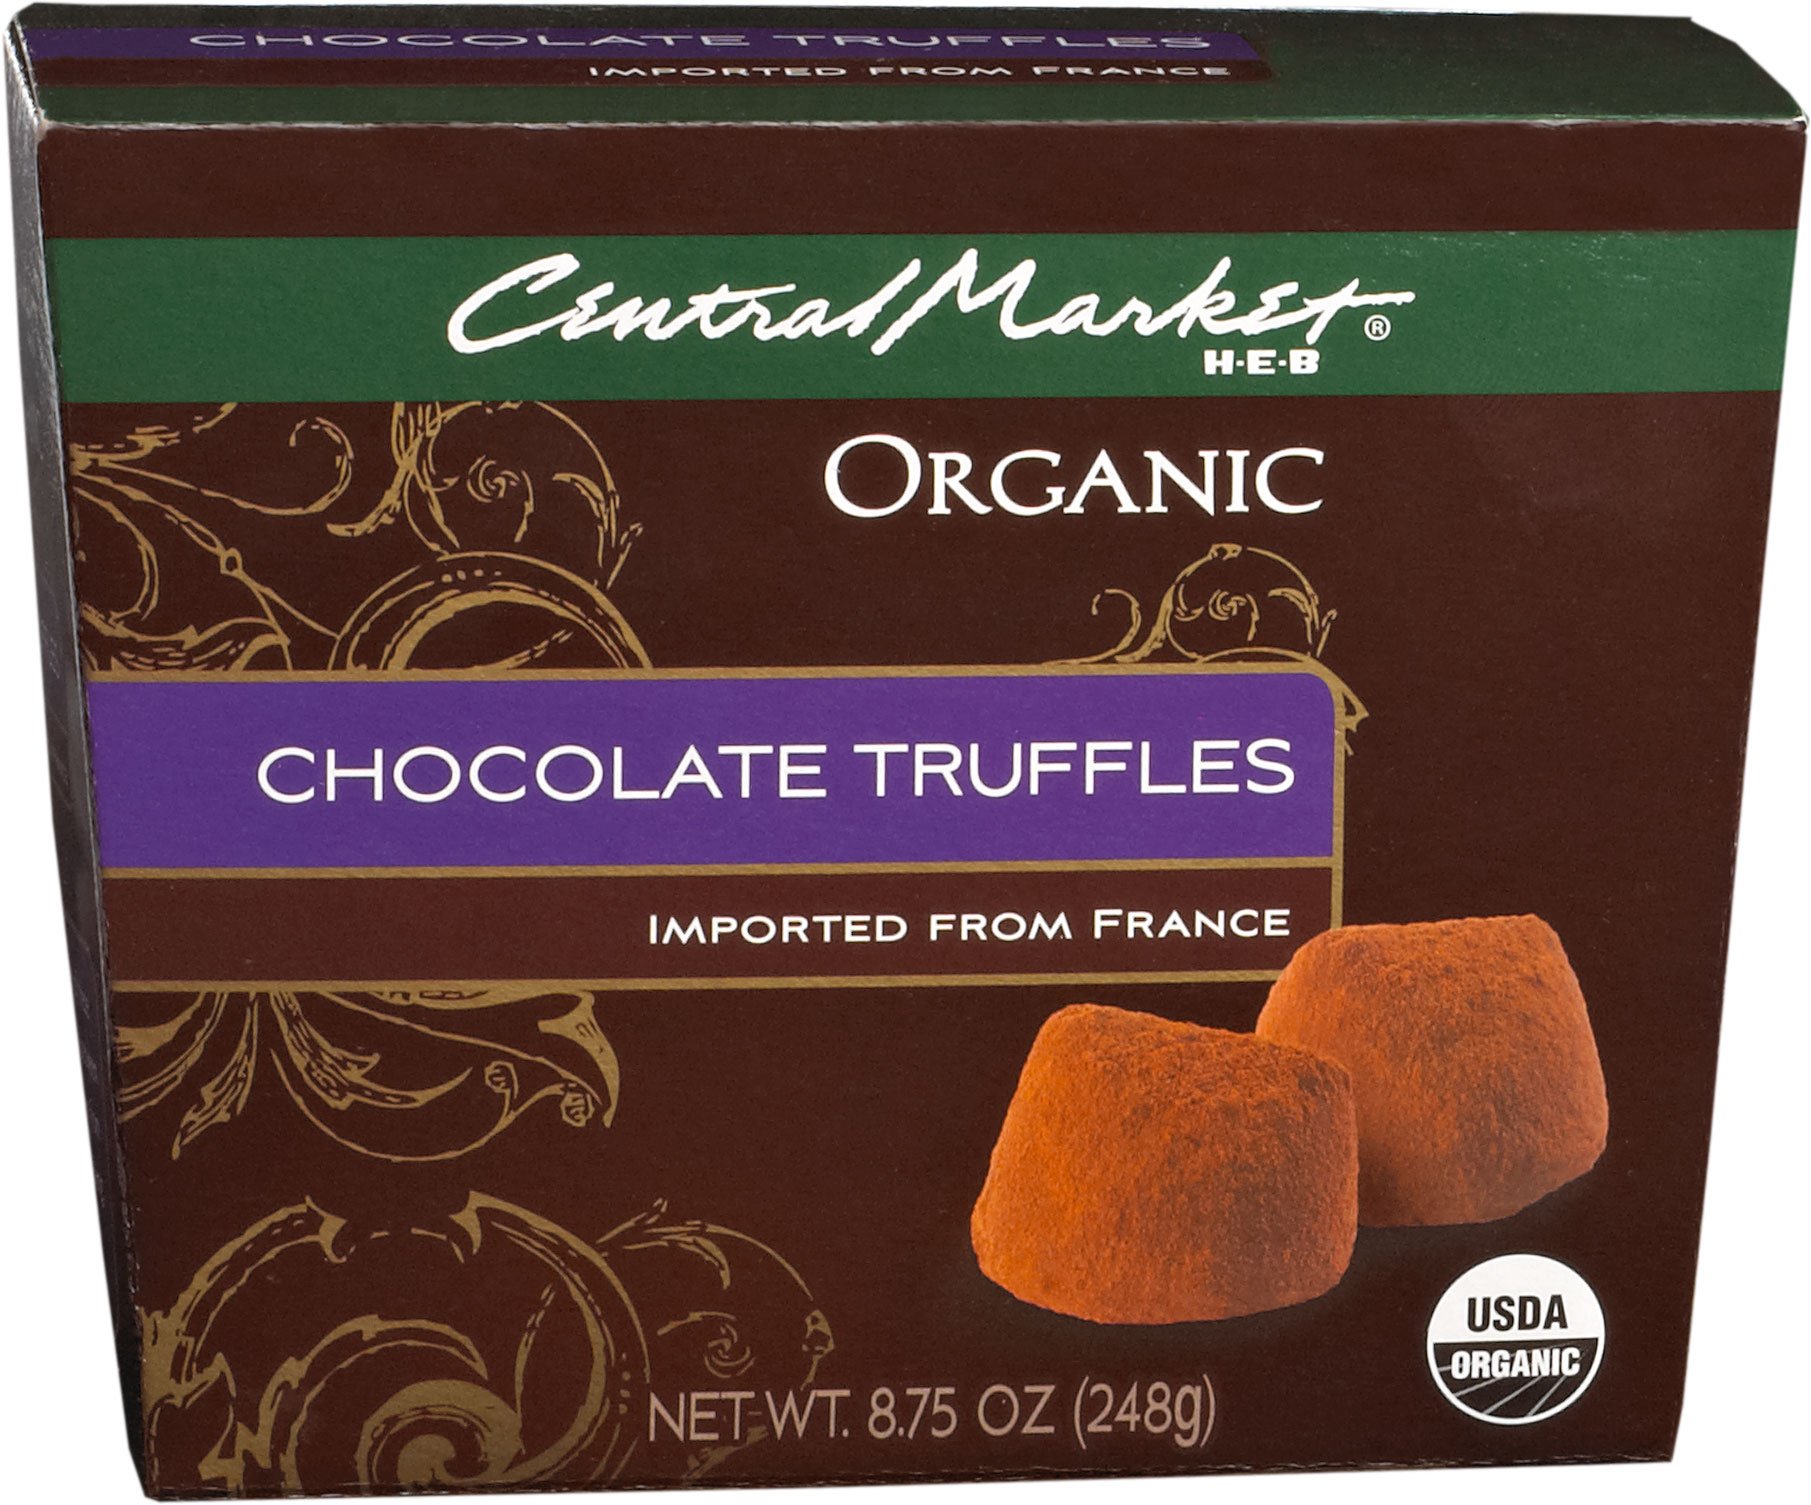 Lindt Lindor Assorted Chocolate Truffles - Shop Candy at H-E-B